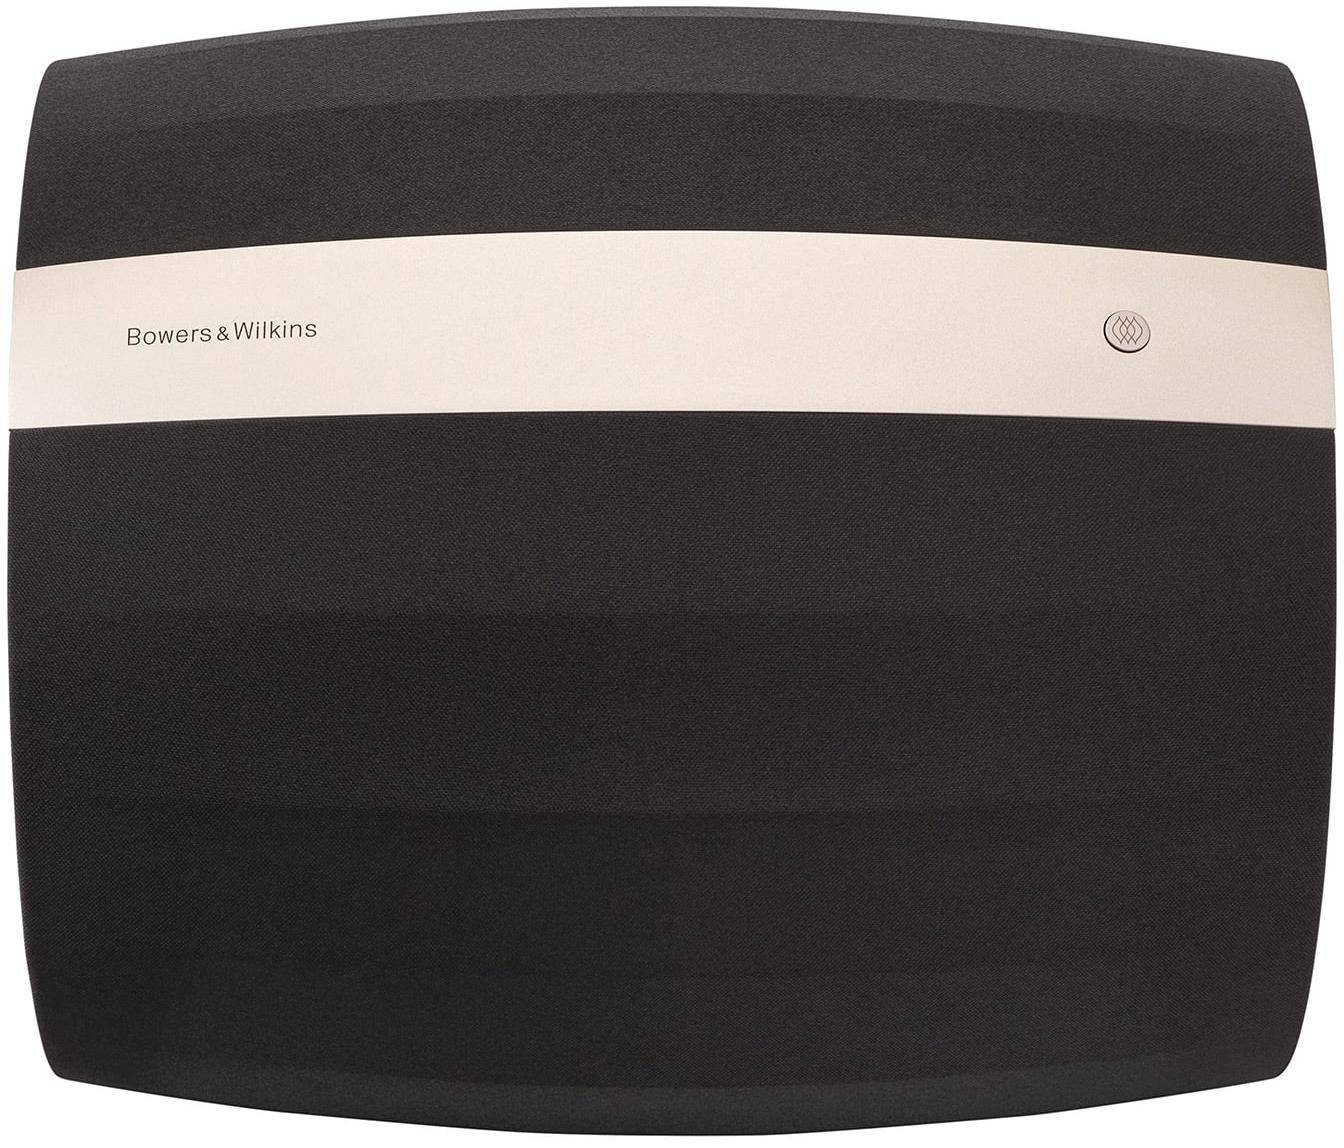 Bowers & Wilkins Formation Bass Wireless Subwoofer zoom image